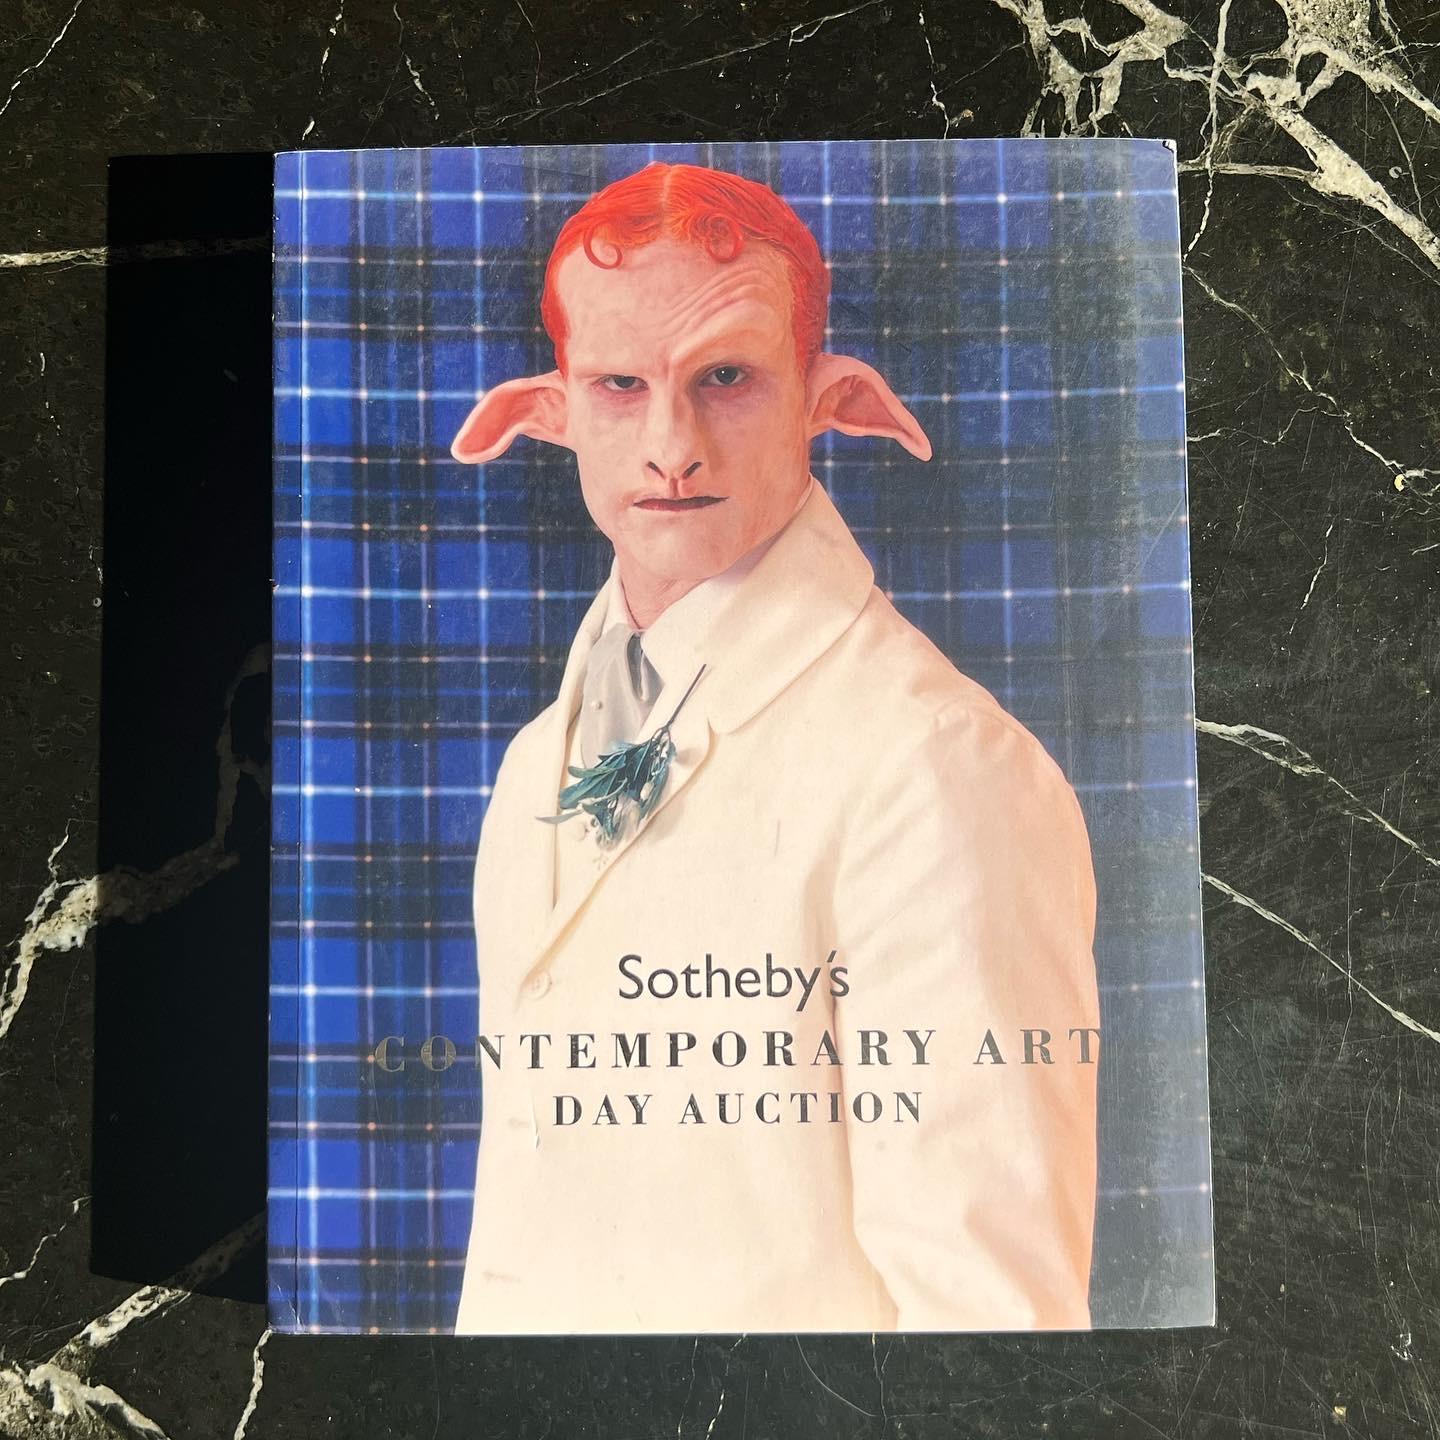 British Sotheby’s Contemporary Art Day Auction Catalogue, London, 2007 For Sale